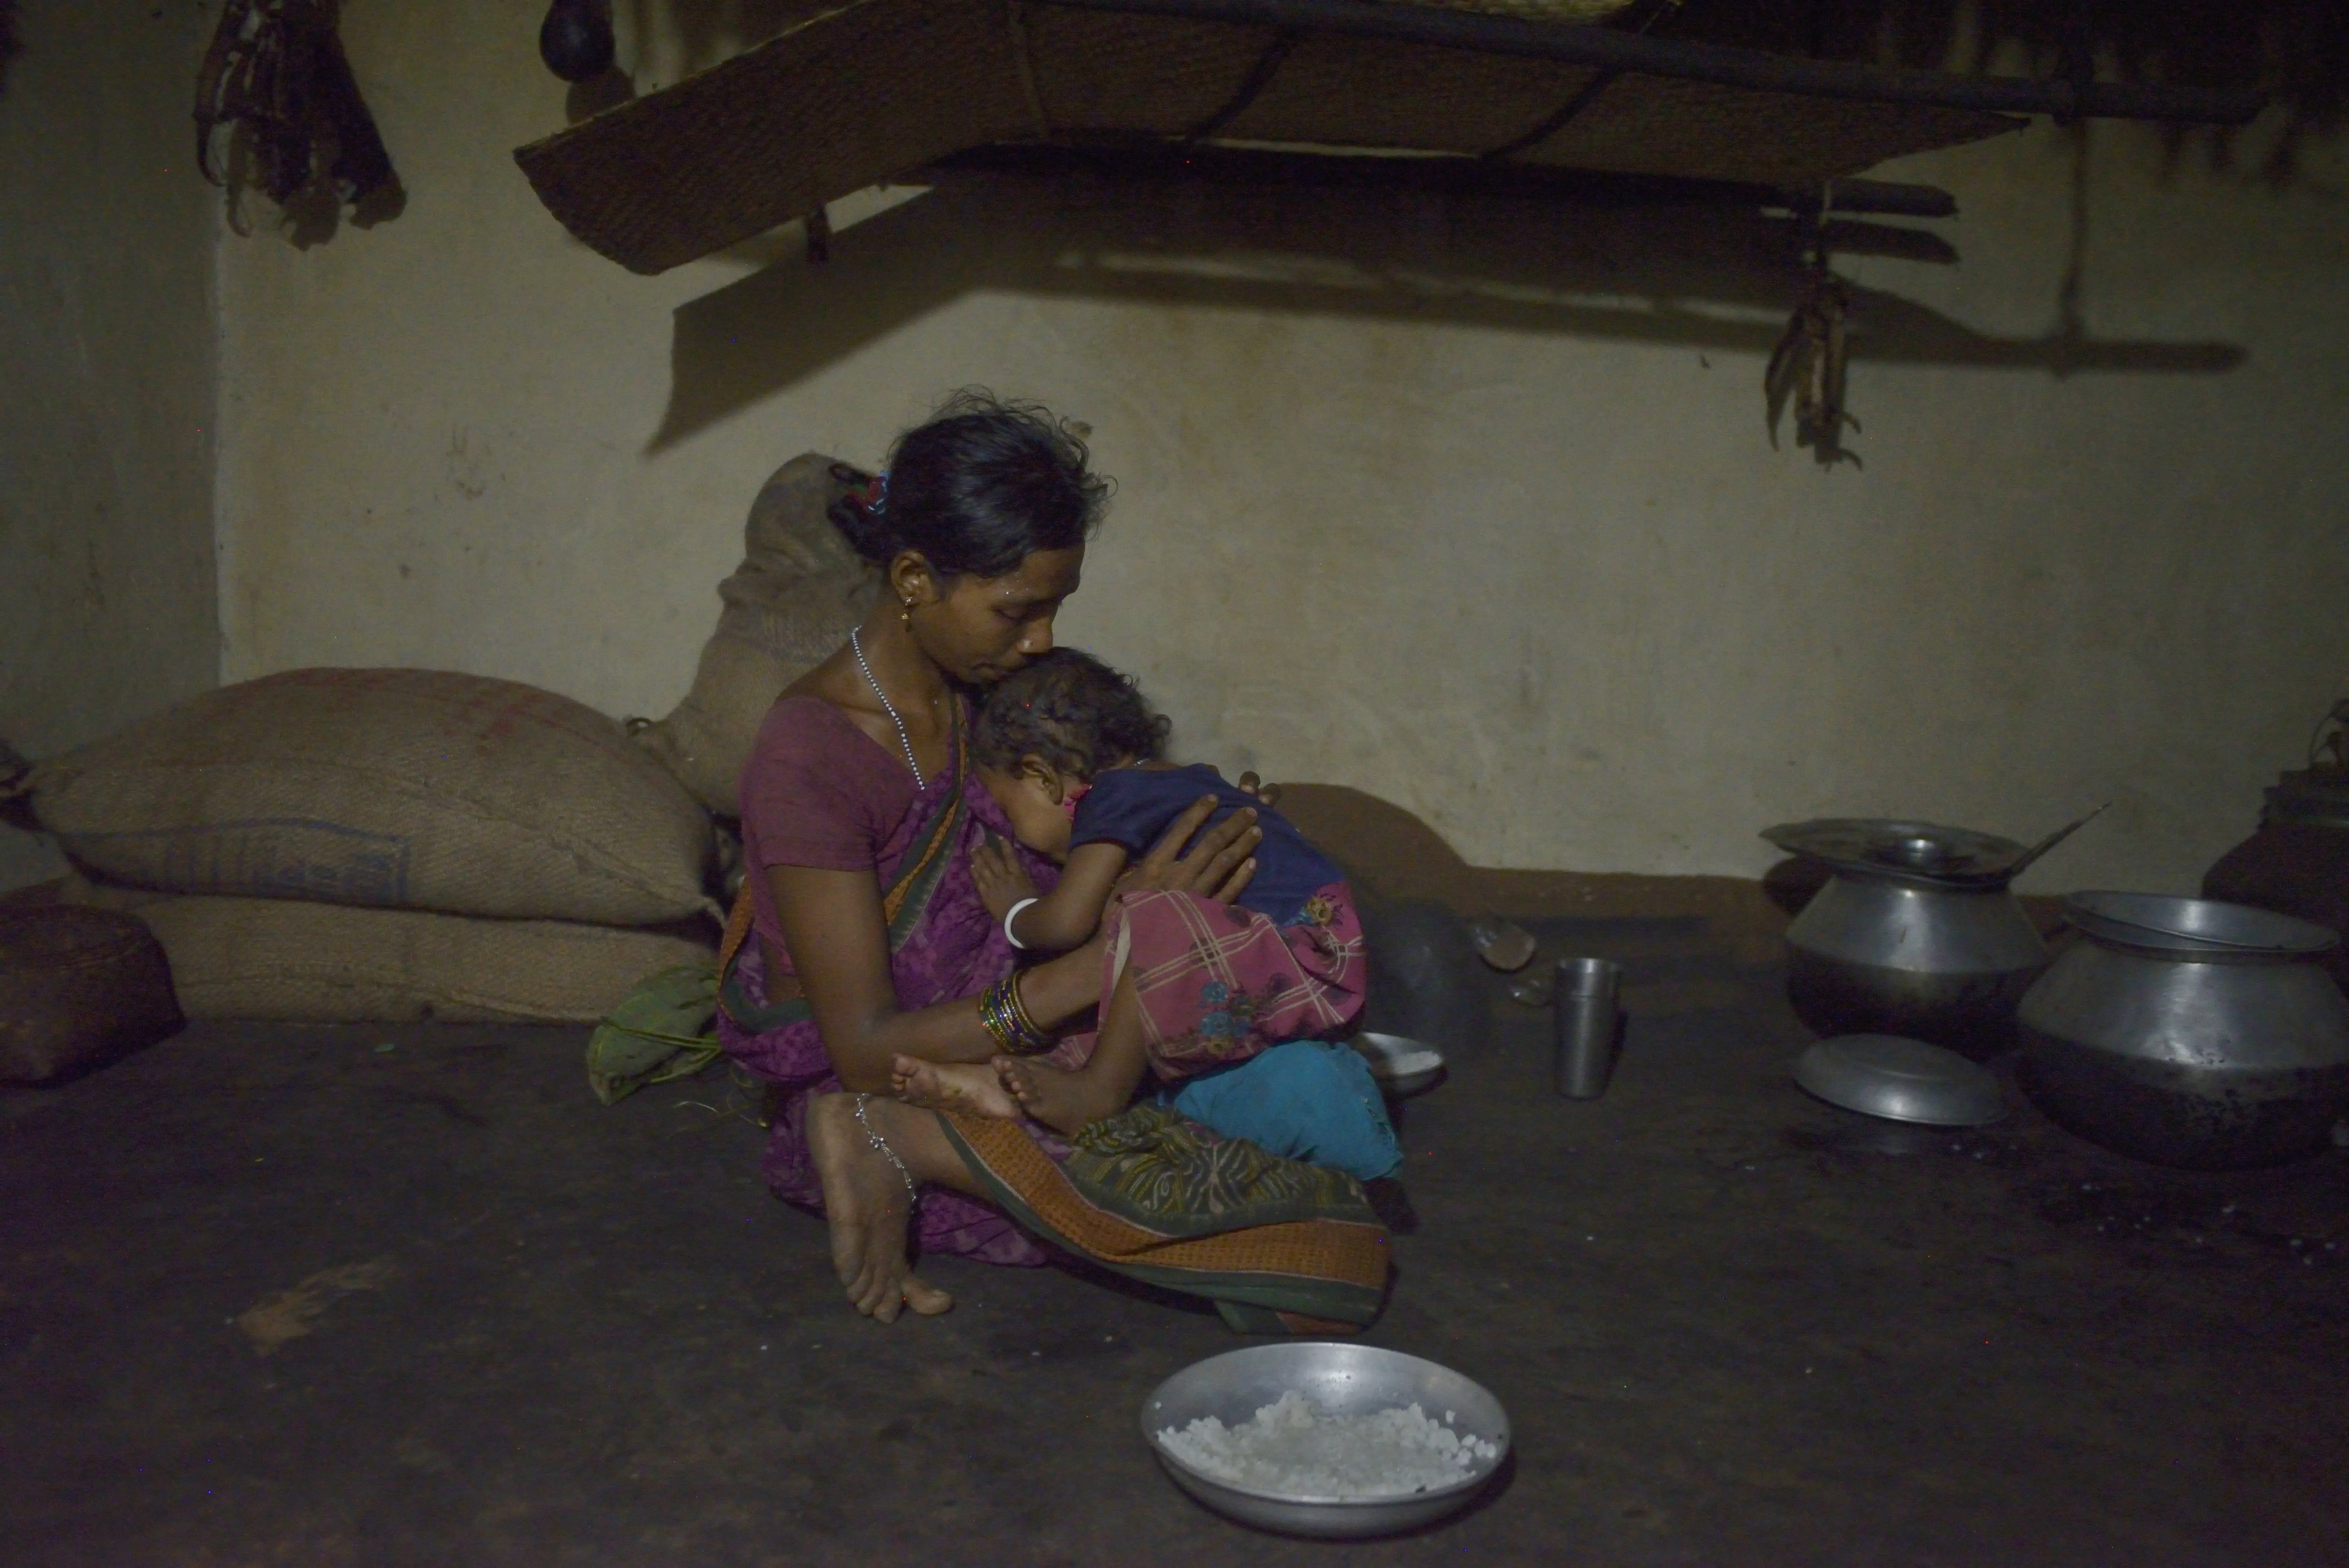 A woman and her daughter sitting next to some pots where they are preparing curries and rice